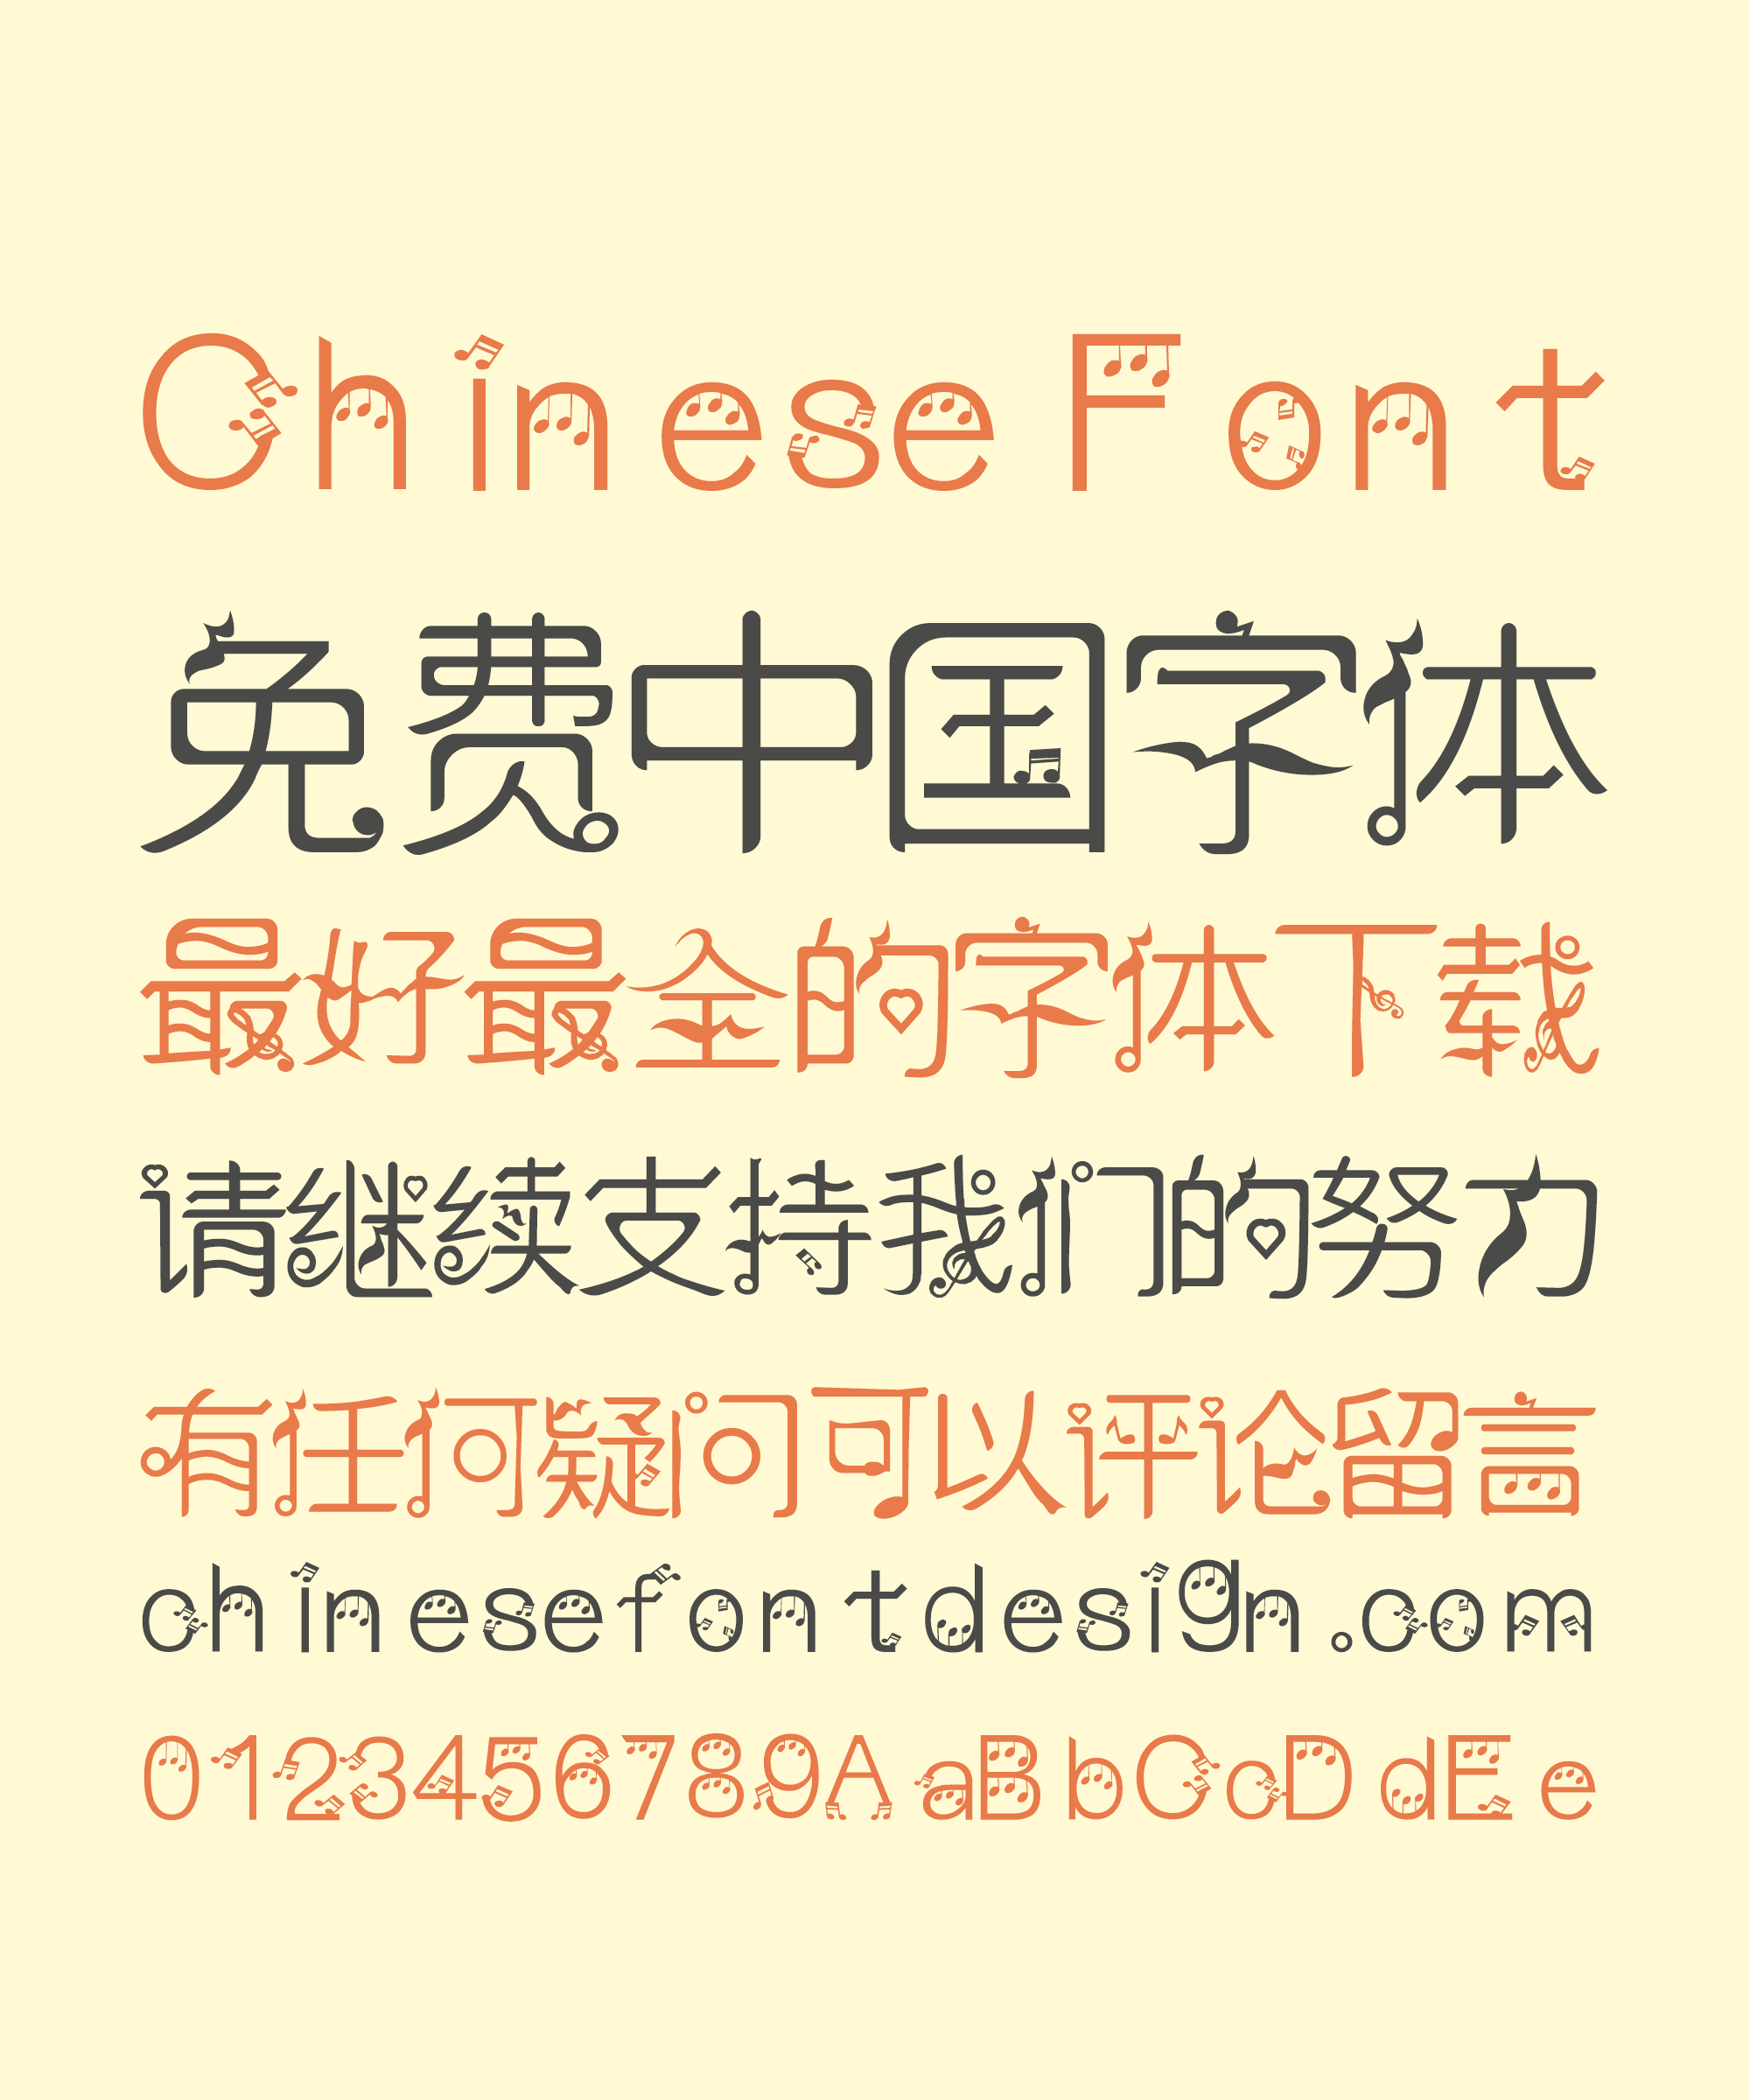 chinese style font in google docs